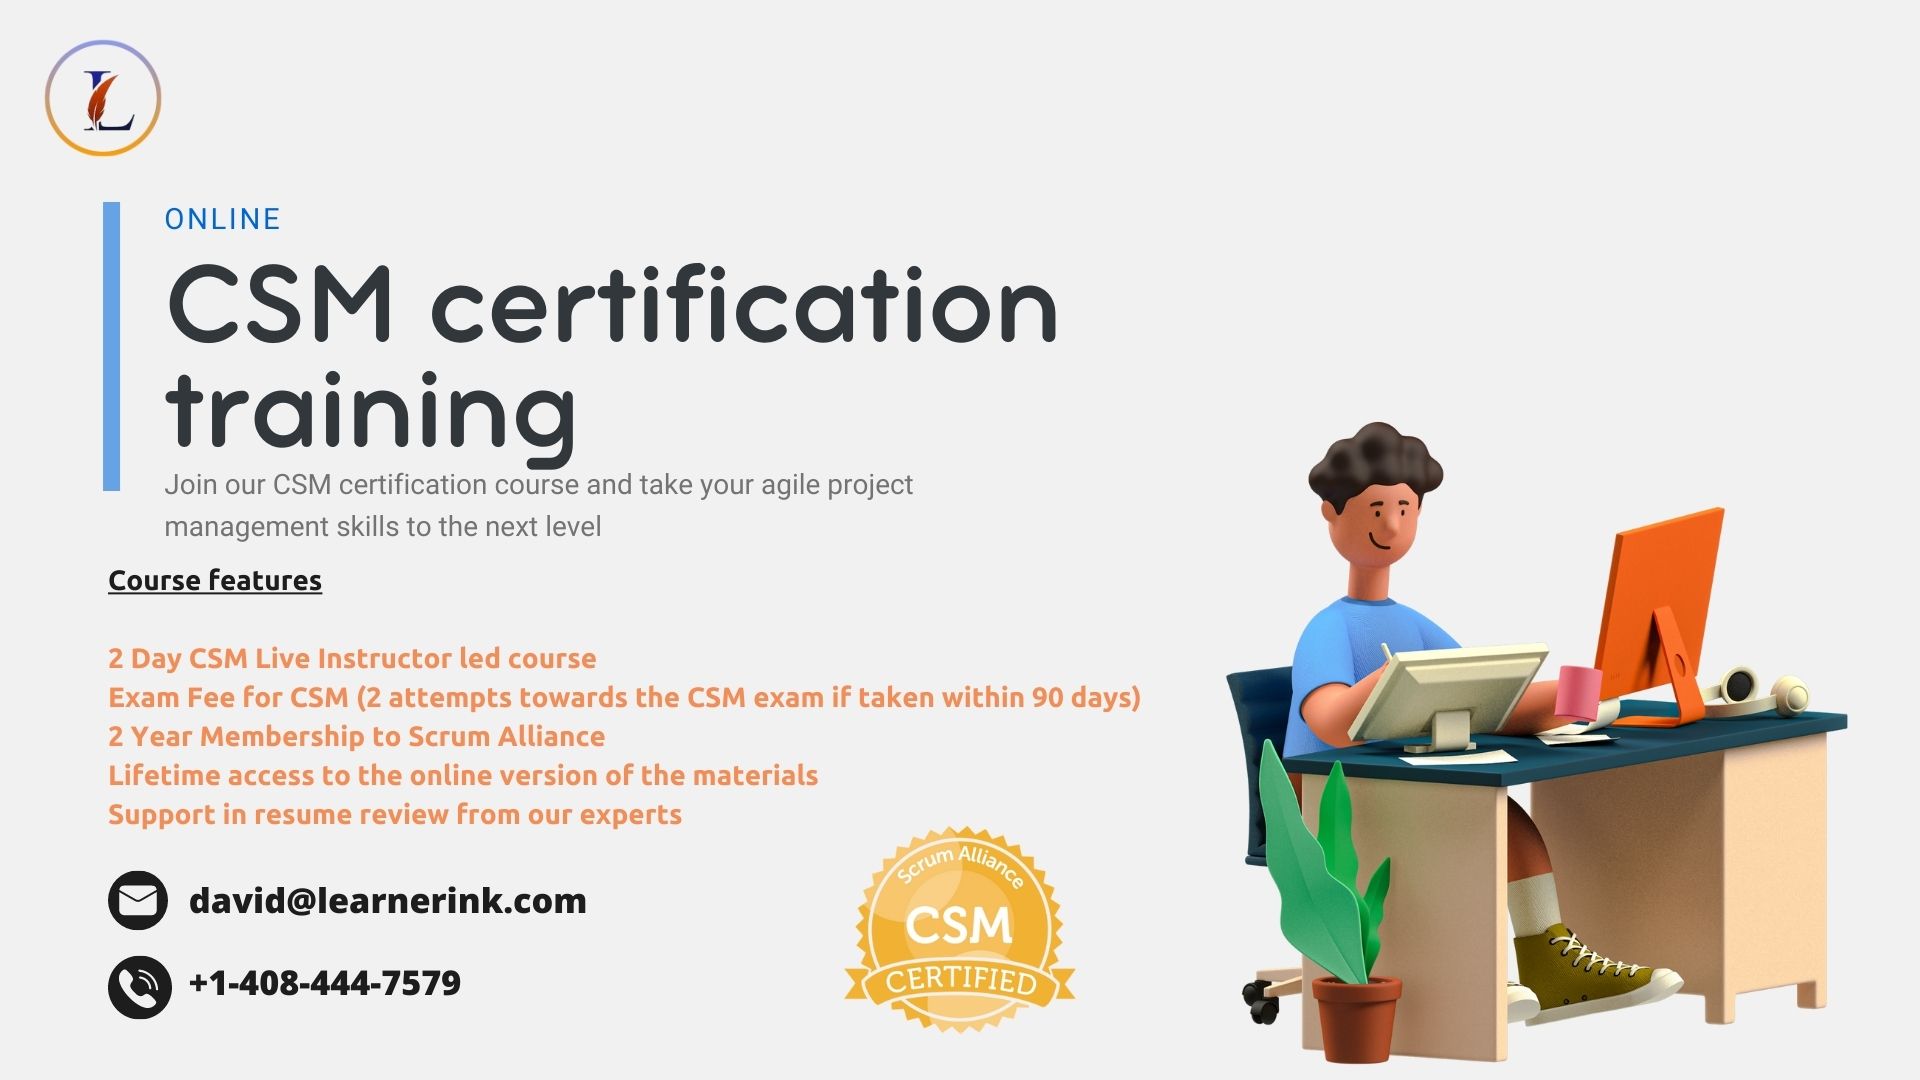 Become a certified ScrumMaster with our CSM certification training